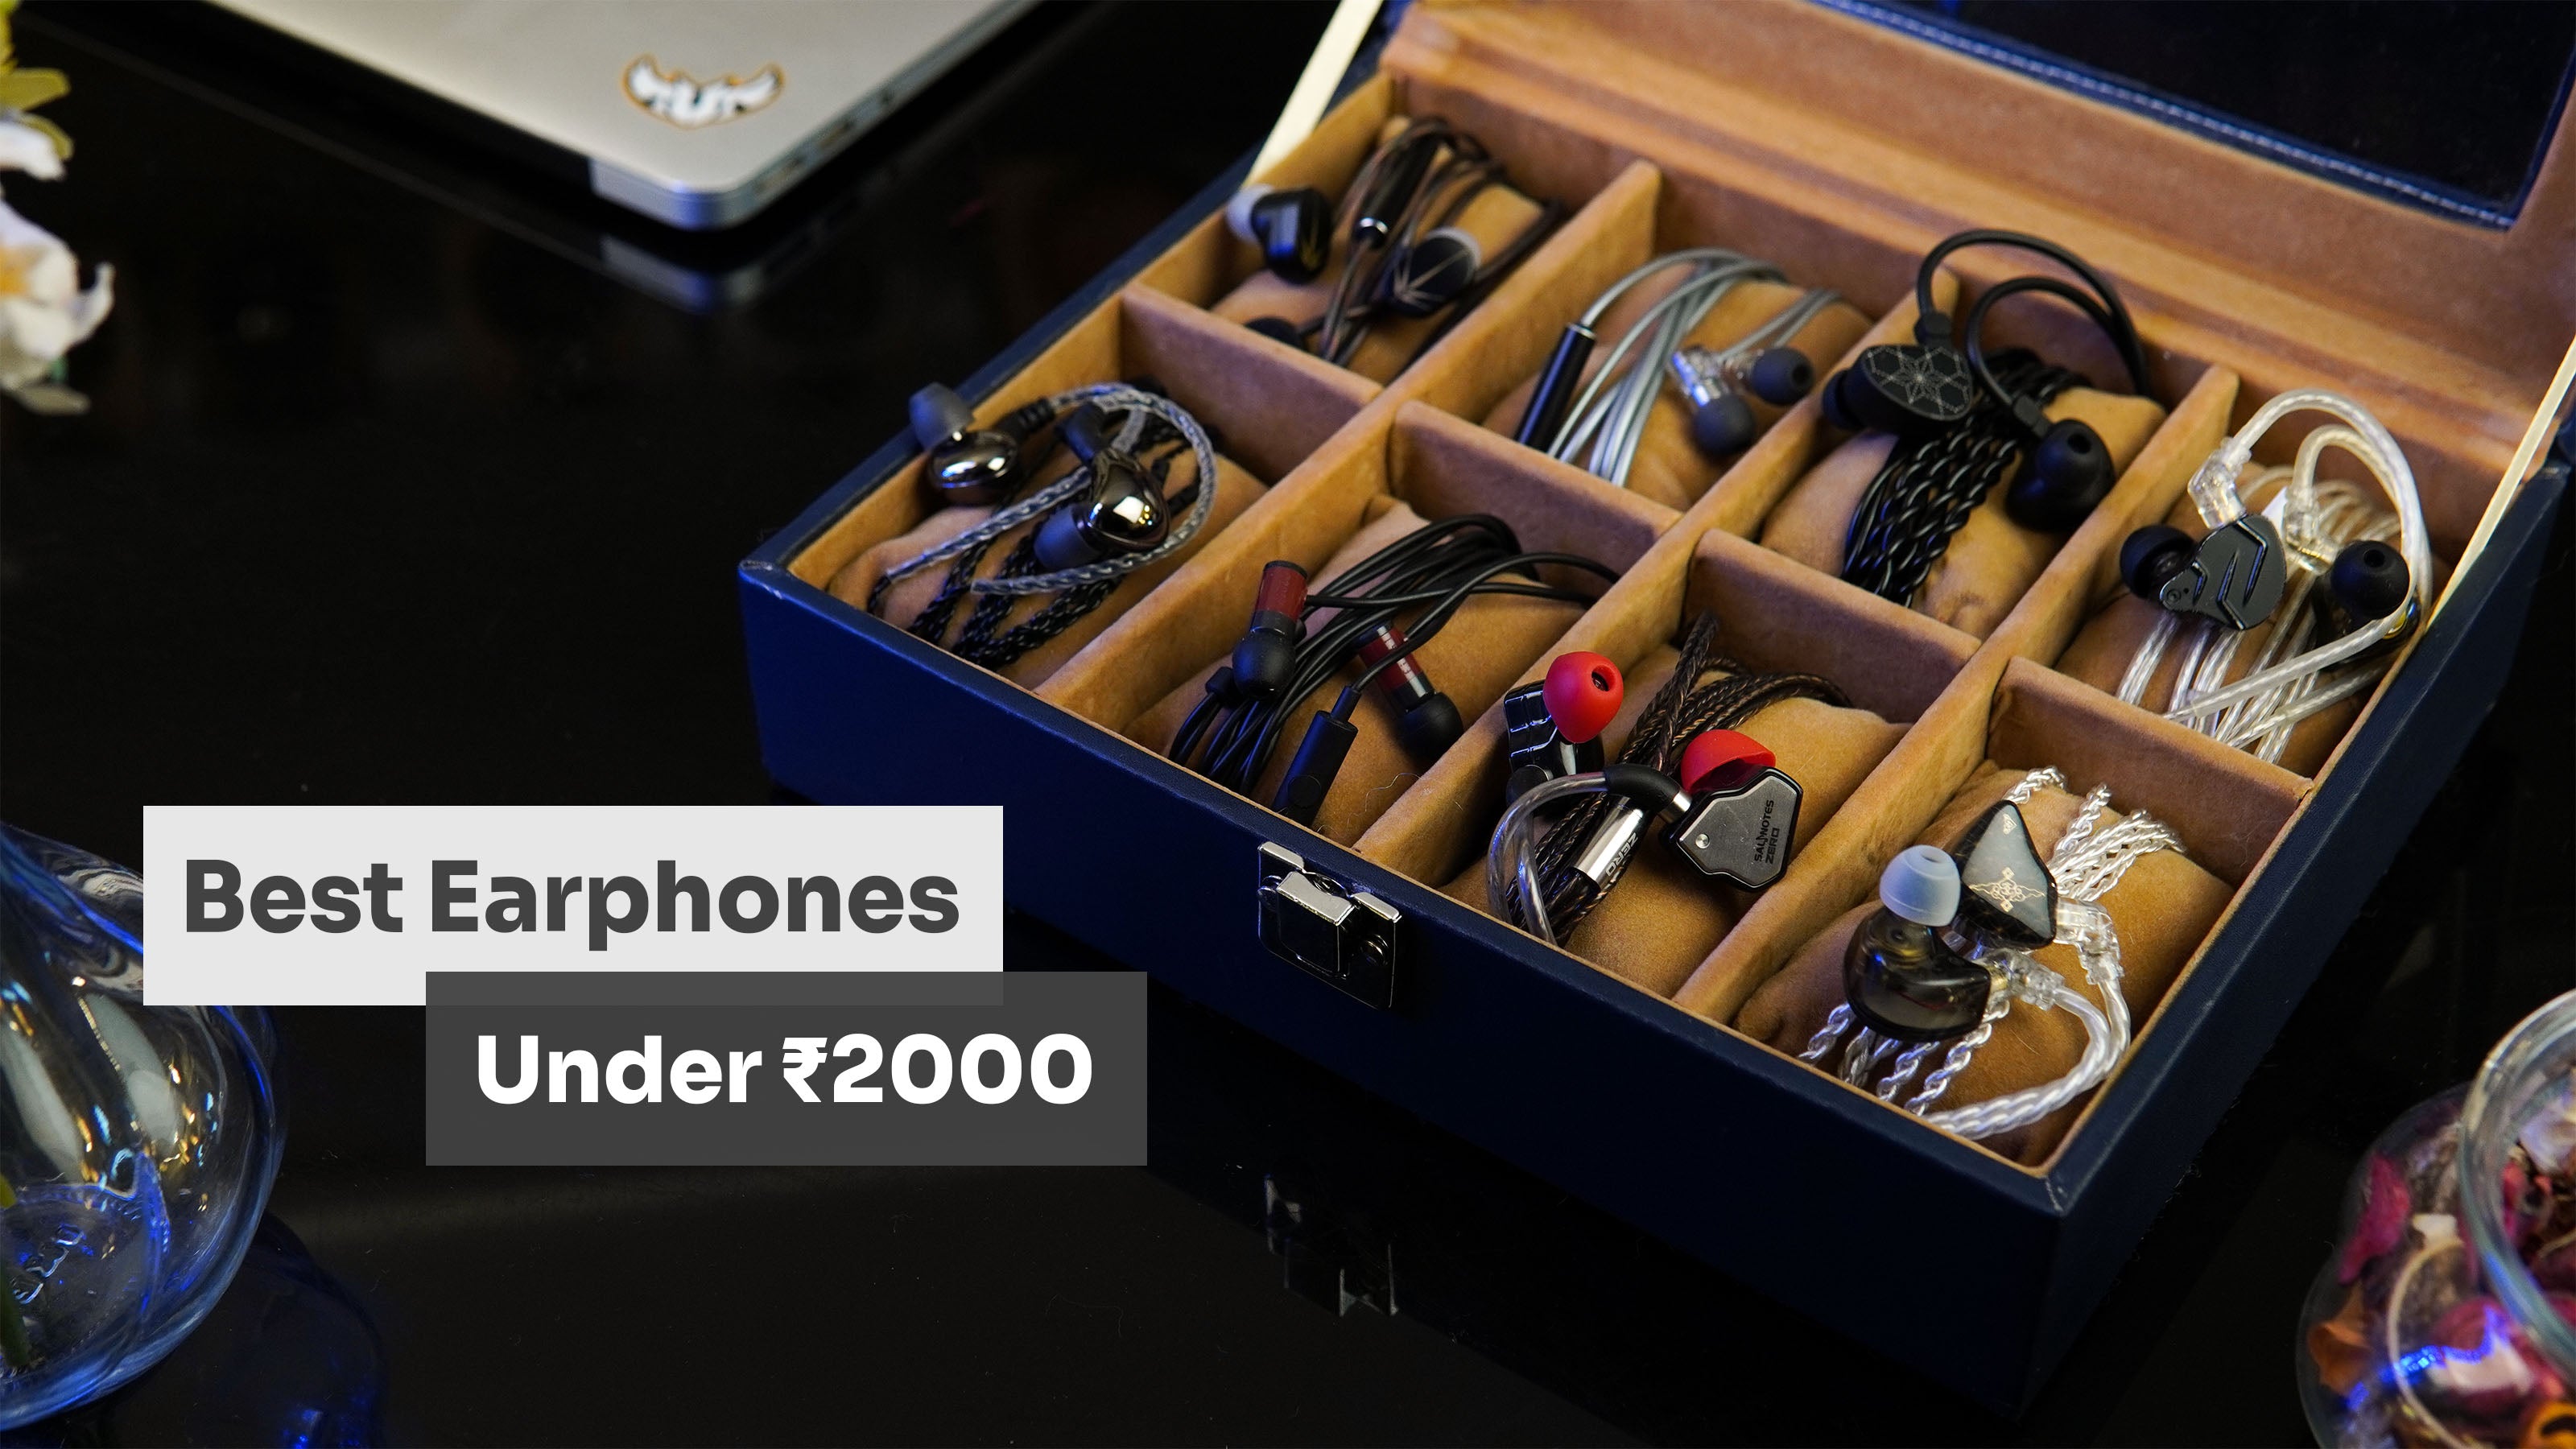 Comparing the Best Earphones under Rs.2,000